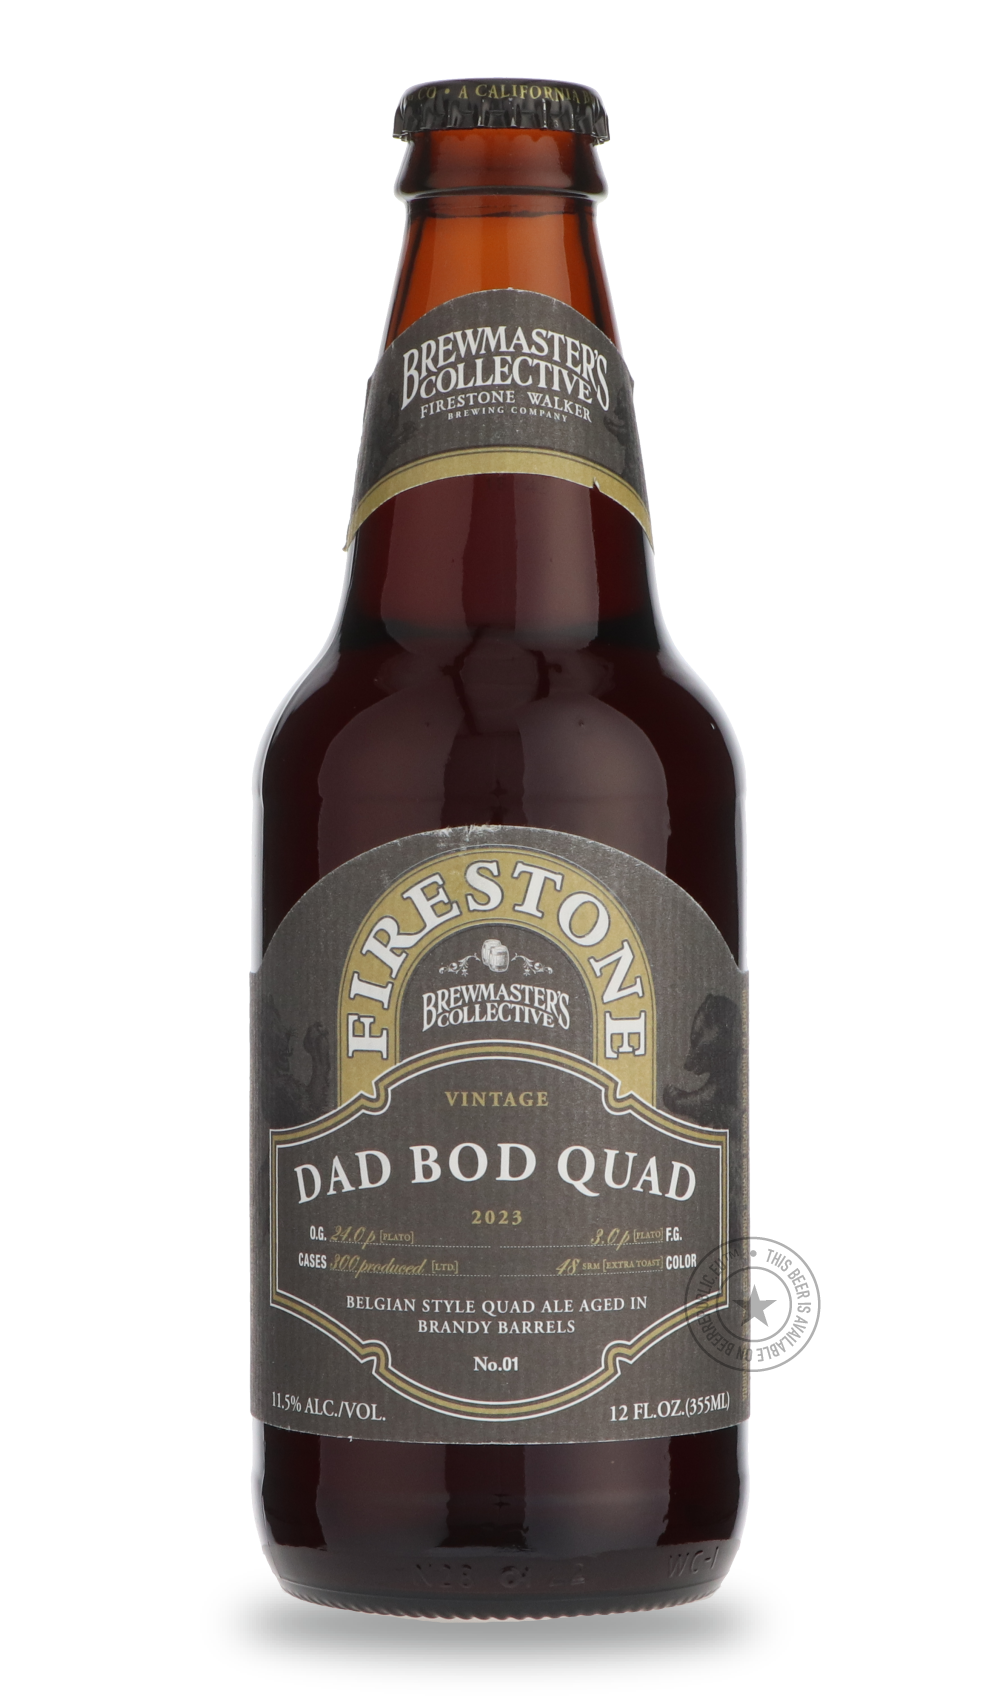 -Firestone Walker- Dad Bod Quad-Brown & Dark- Only @ Beer Republic - The best online beer store for American & Canadian craft beer - Buy beer online from the USA and Canada - Bier online kopen - Amerikaans bier kopen - Craft beer store - Craft beer kopen - Amerikanisch bier kaufen - Bier online kaufen - Acheter biere online - IPA - Stout - Porter - New England IPA - Hazy IPA - Imperial Stout - Barrel Aged - Barrel Aged Imperial Stout - Brown - Dark beer - Blond - Blonde - Pilsner - Lager - Wheat - Weizen - 